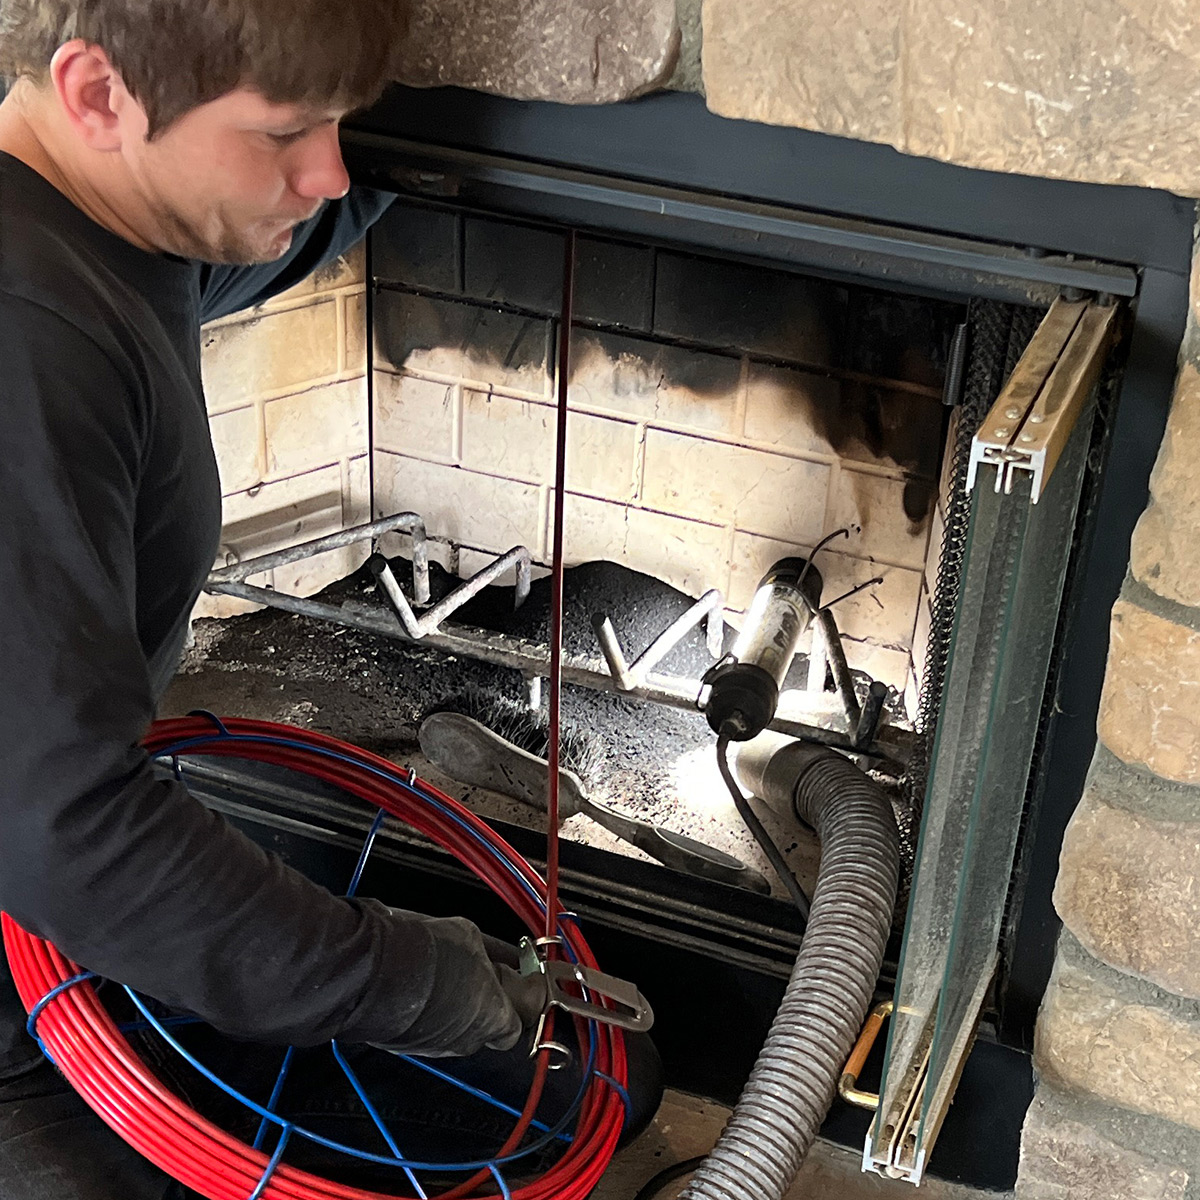 Chimney cleaning services available in Oceanside CA